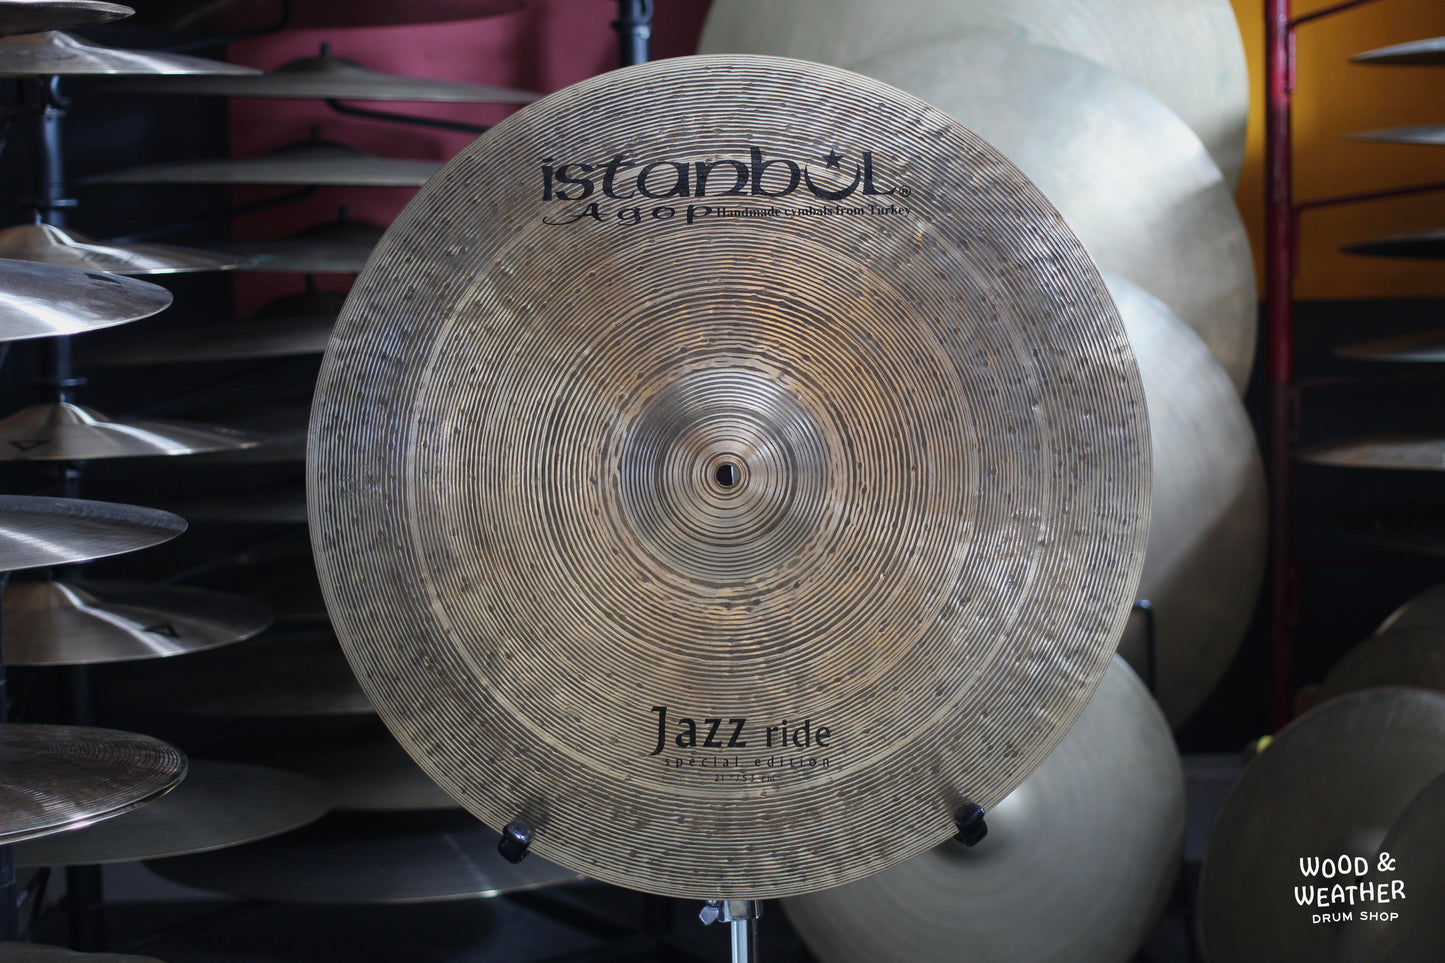 Used Istanbul Agop 21" Special Edition Jazz Ride Cymbal 2062g